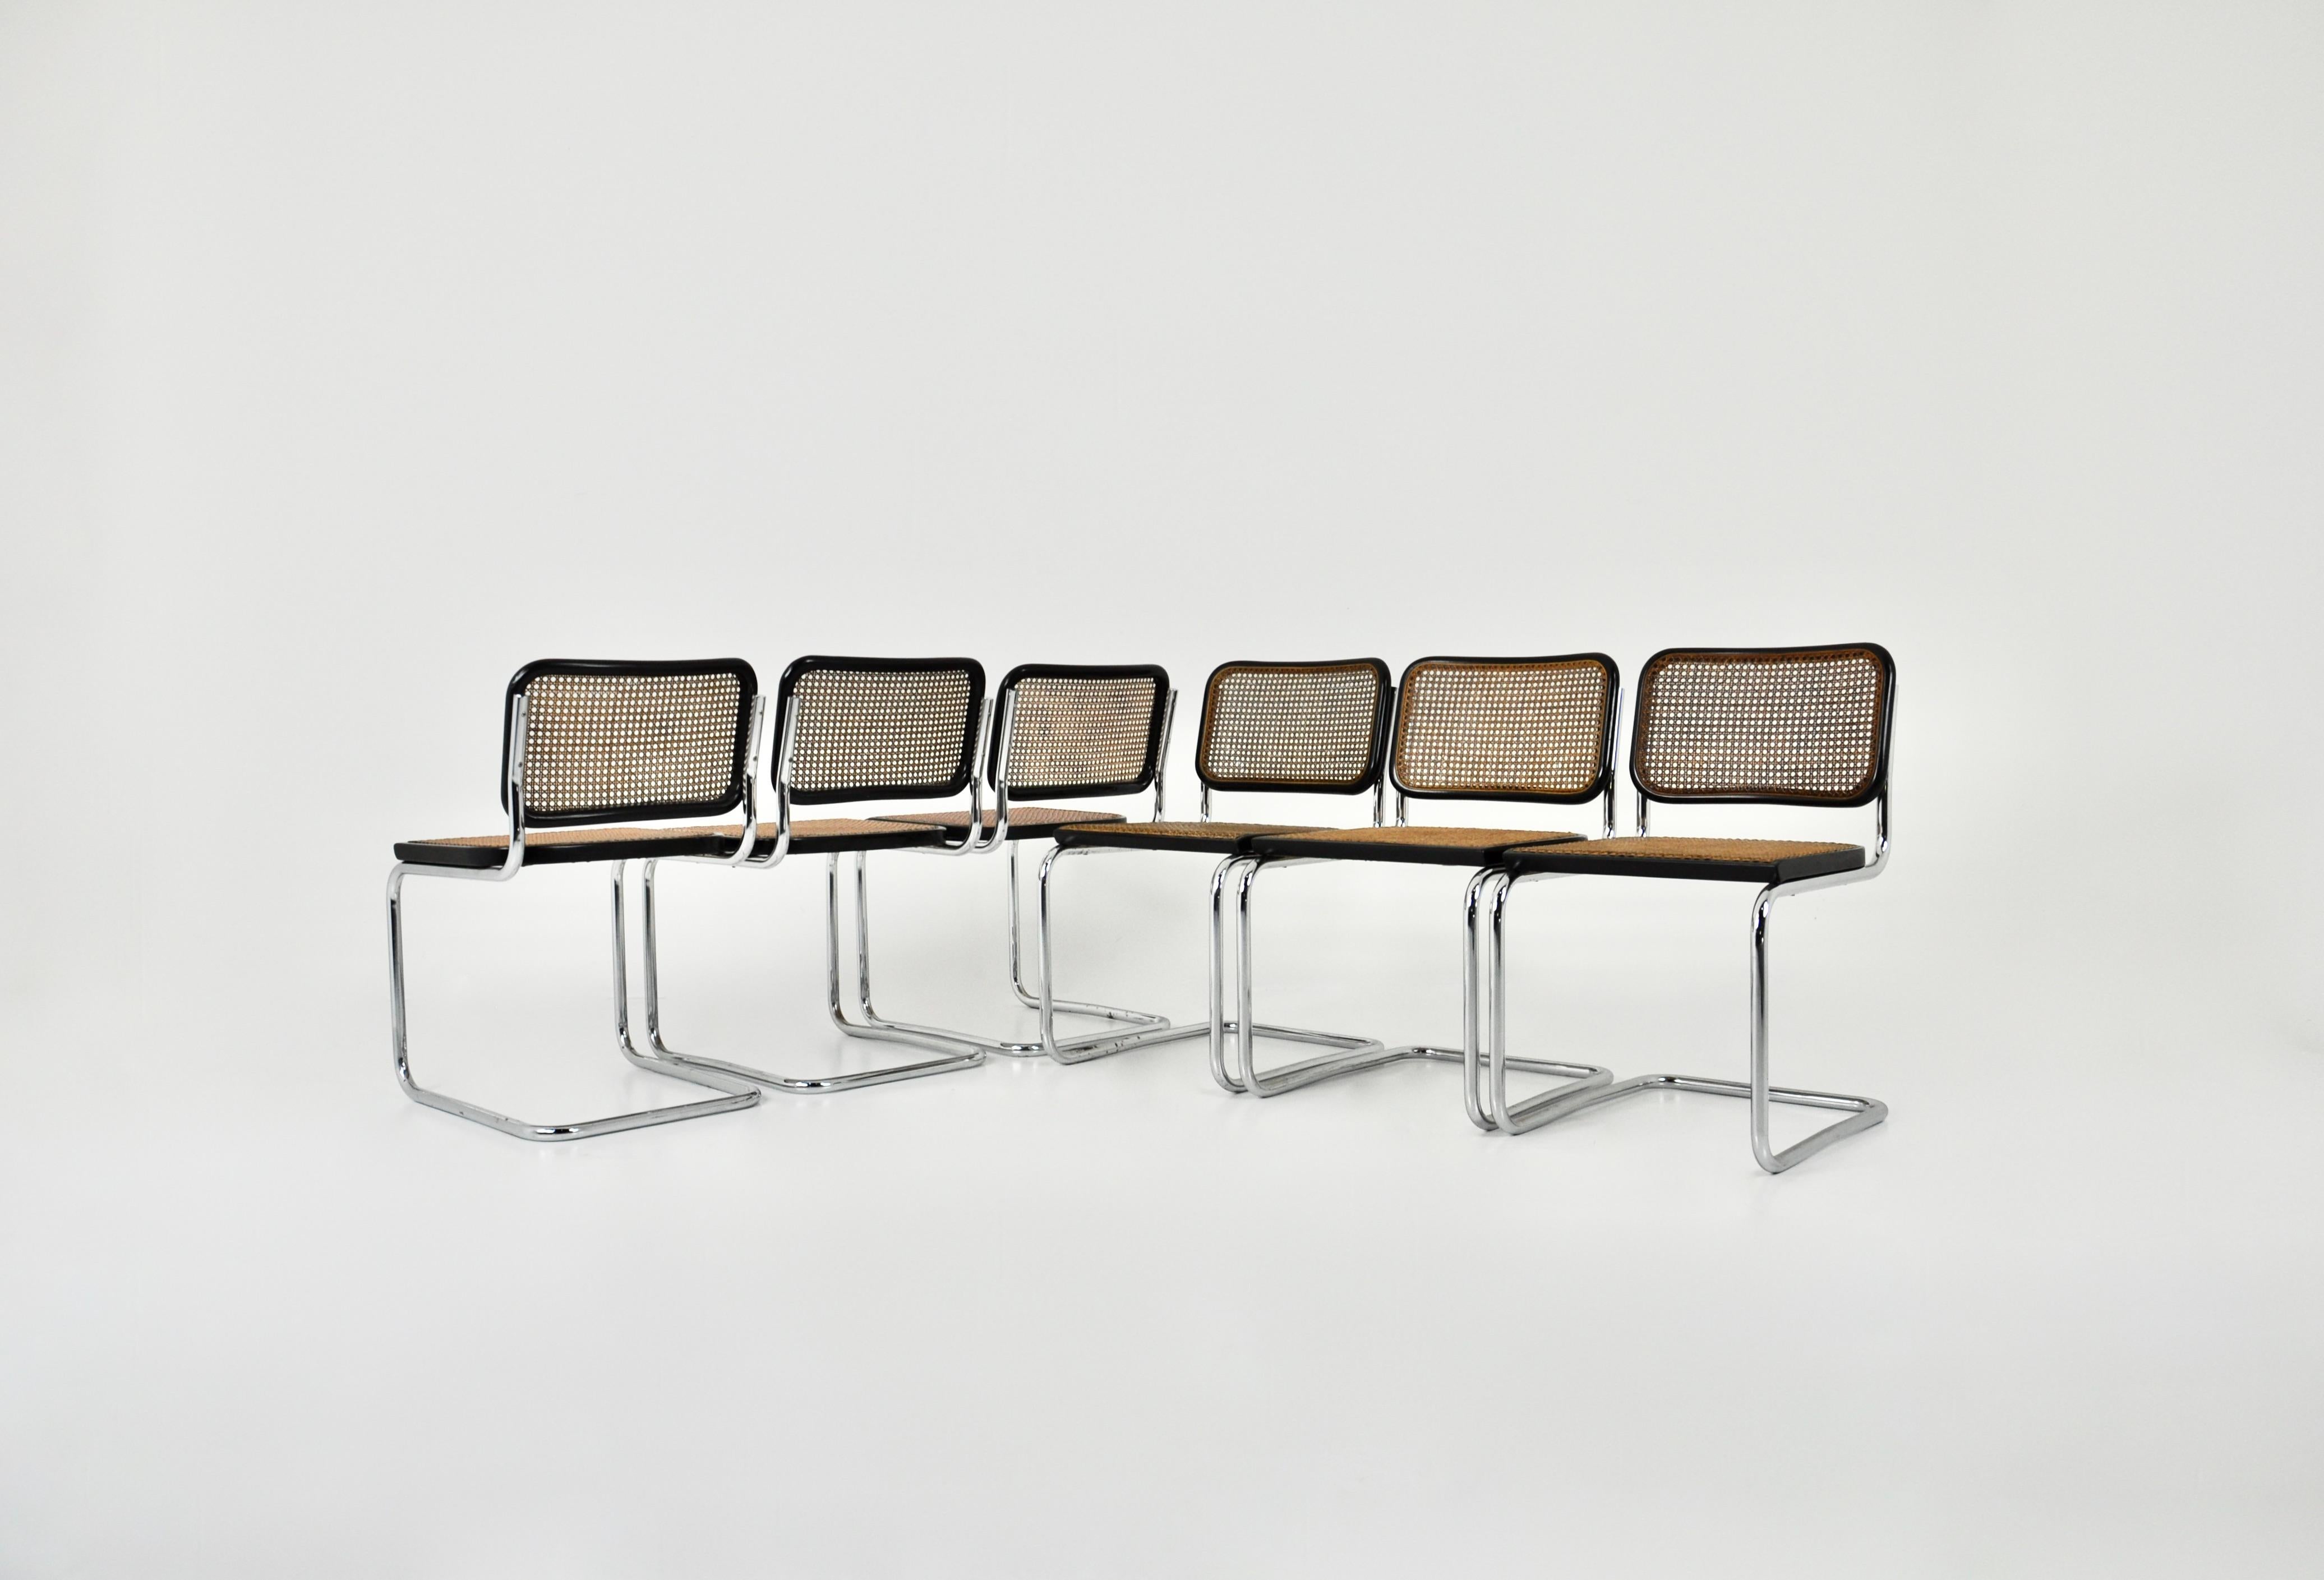 Set of 6 chairs in chromed metal, black wood and cane. Wear due to time and age of the chairs. Dimensions: seat height 46cm. Original Marcel Breuer chairs stamped Gavina.
